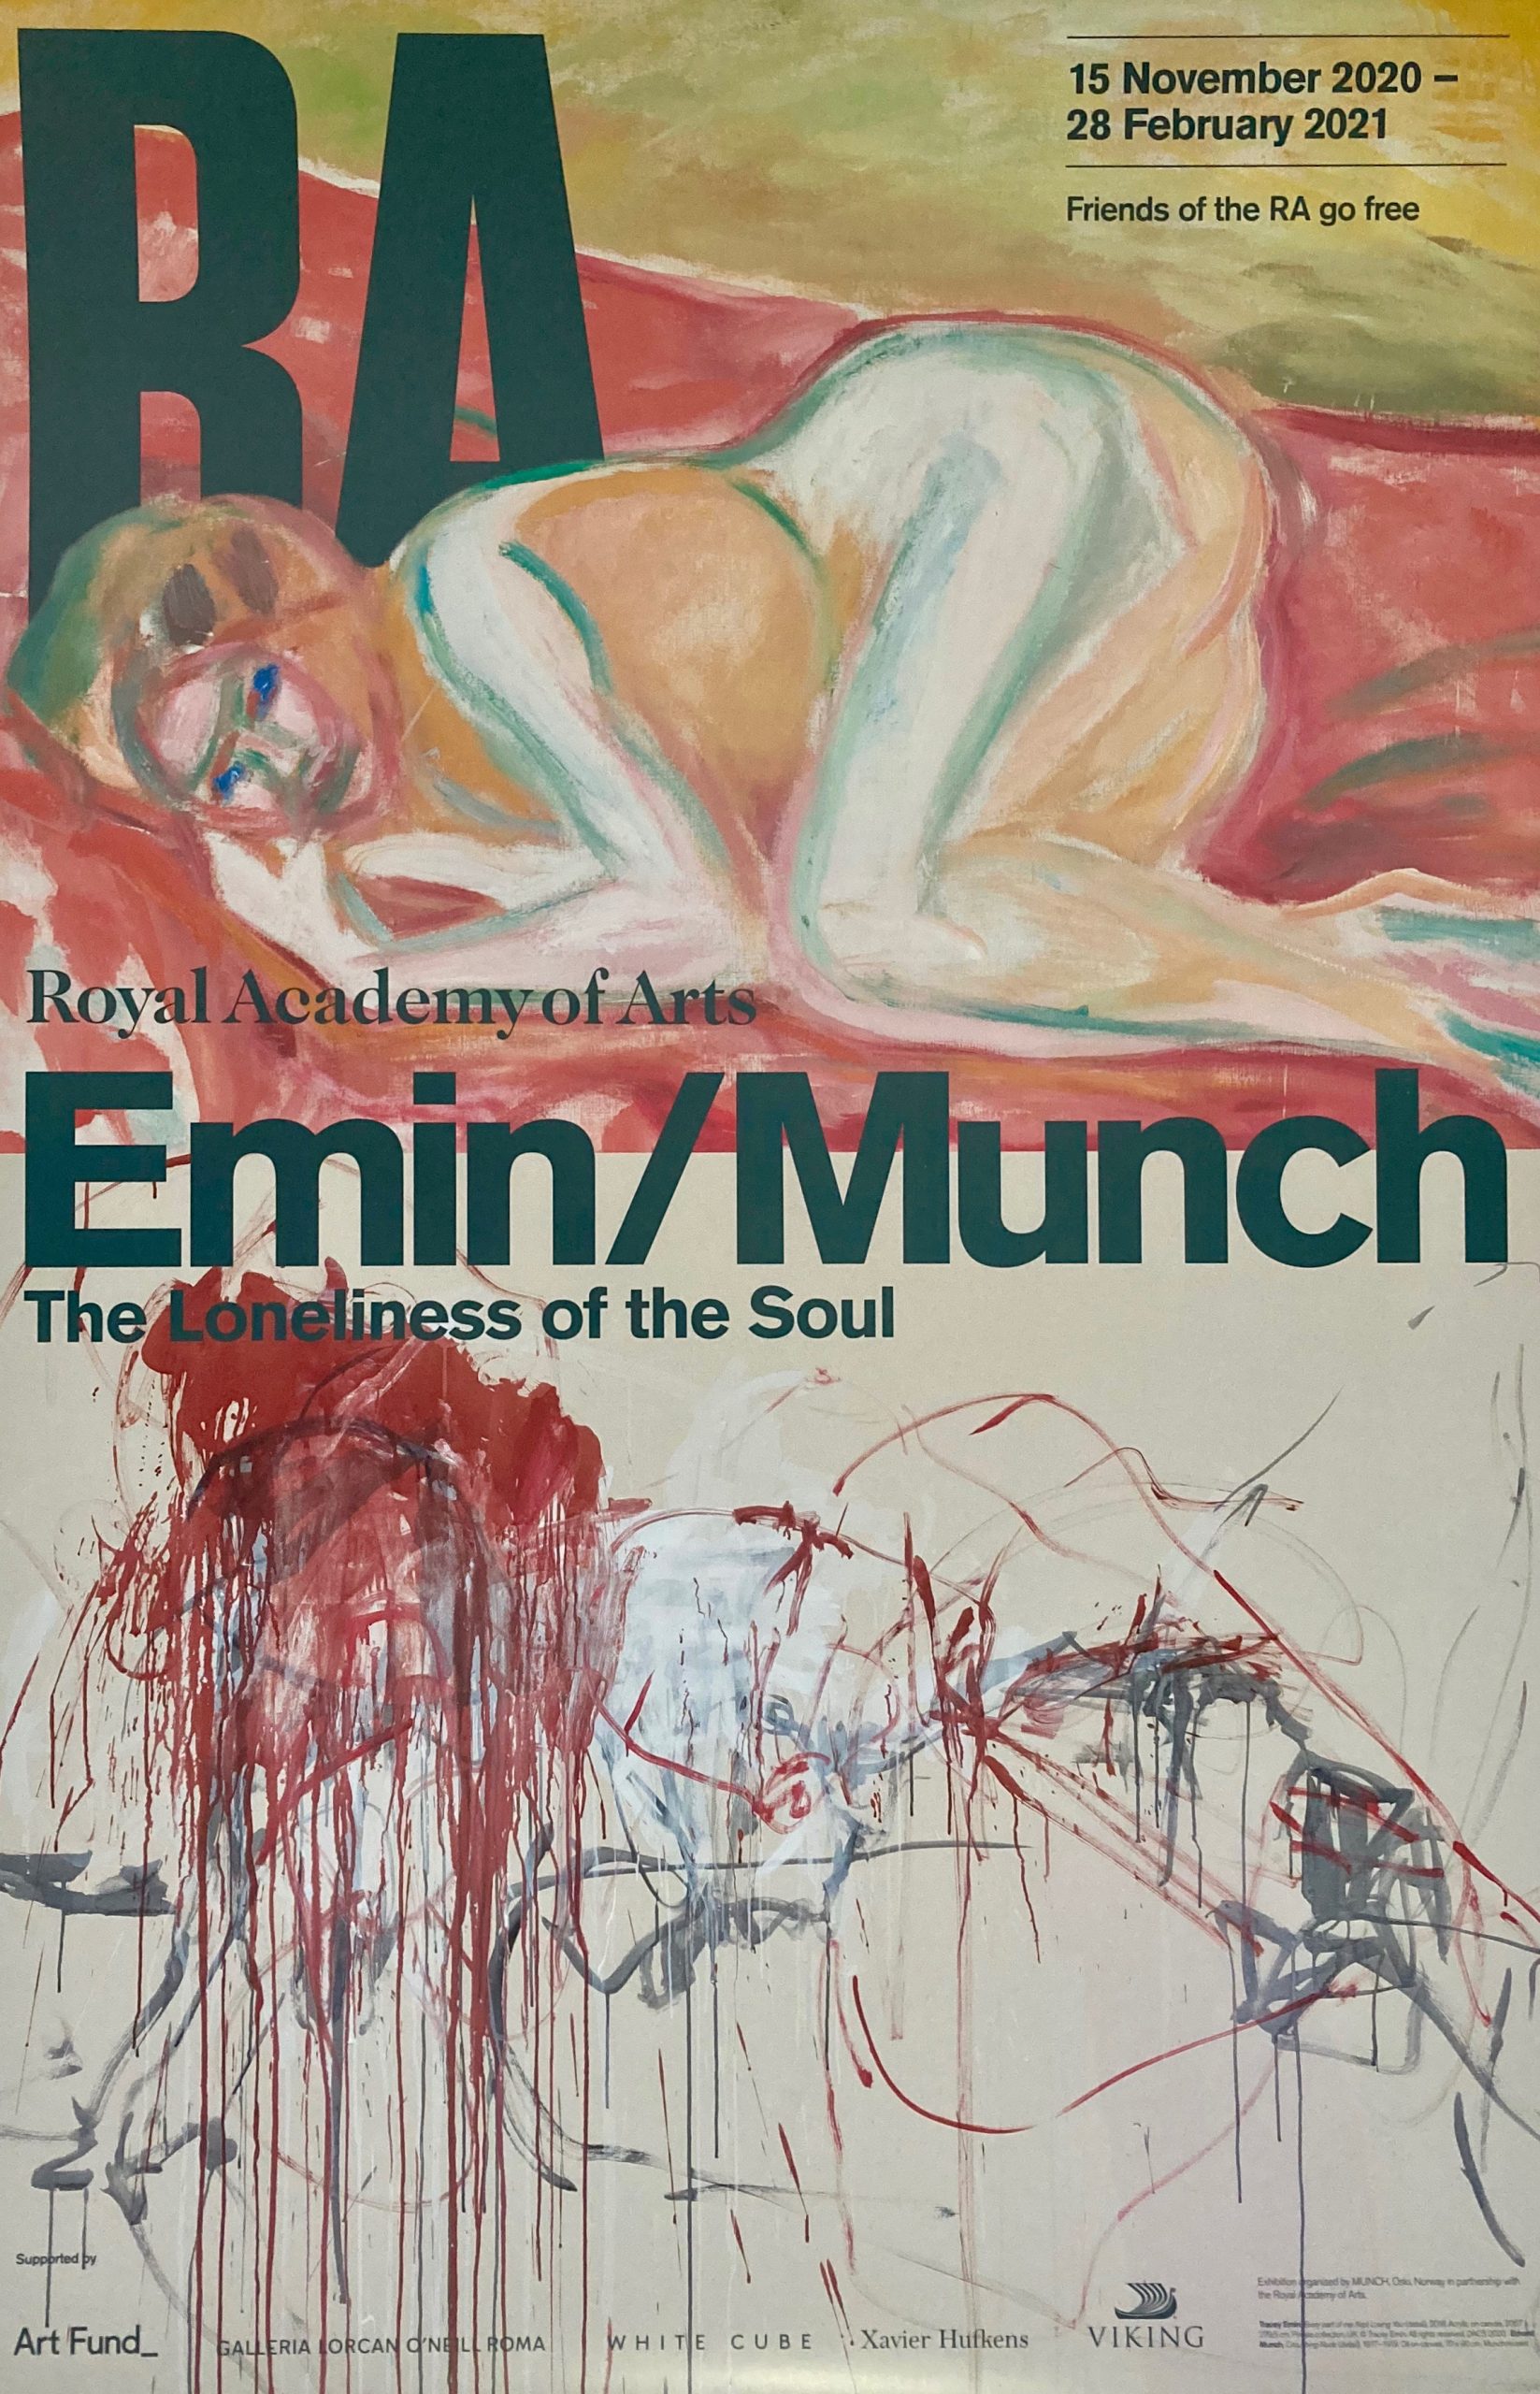 Tracey-Emin-Edvard-Munch-The-Loneliness-of-the-Soul-Show-Poster.jpeg